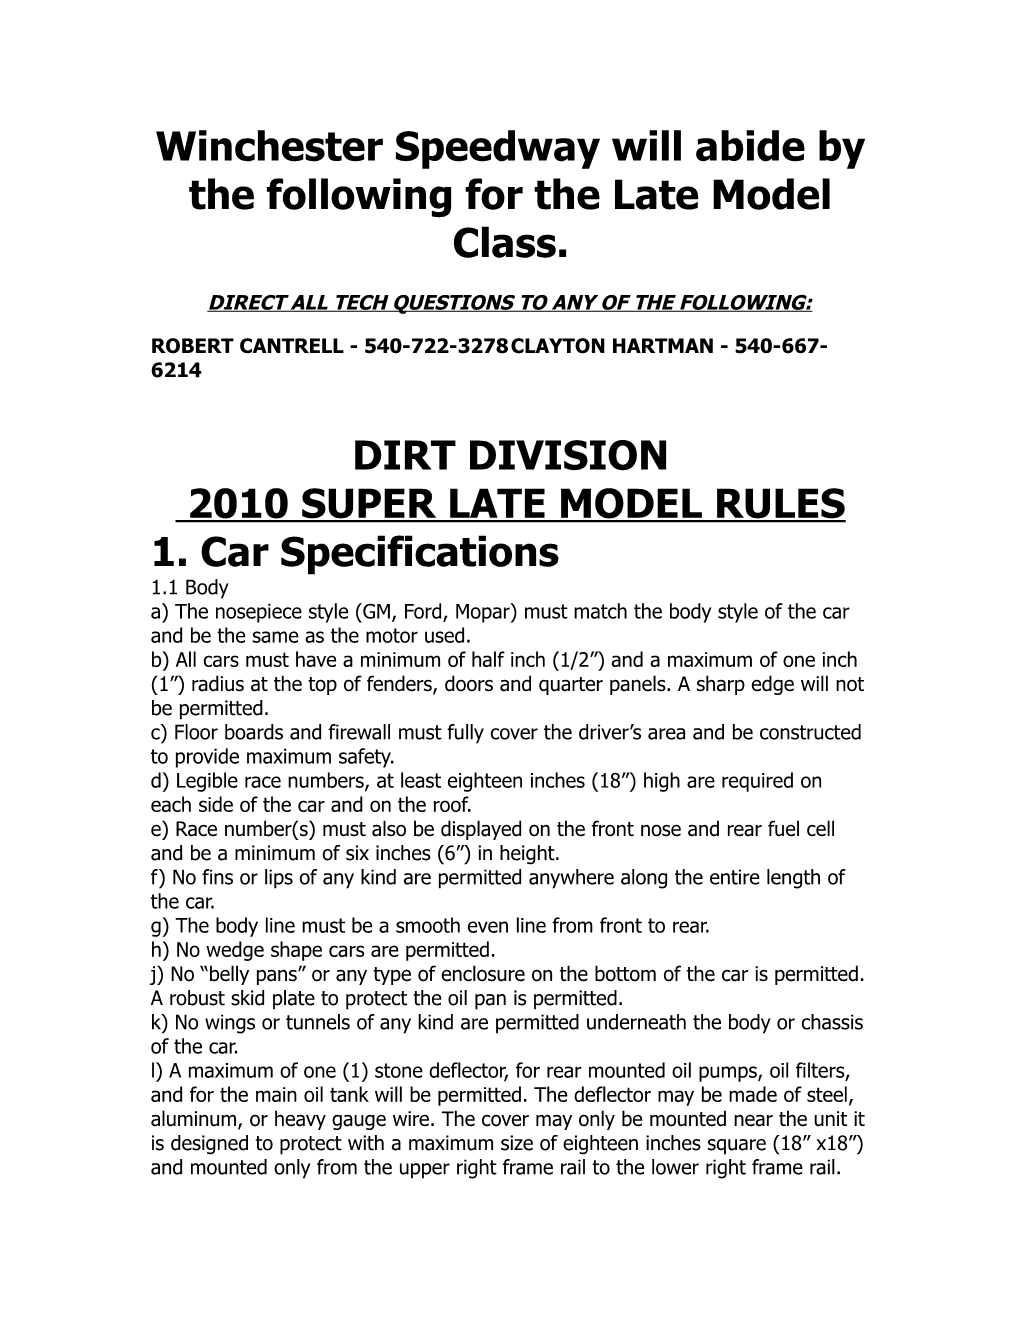 Winchester Speedway Will Abide by the Following for the Late Model Class